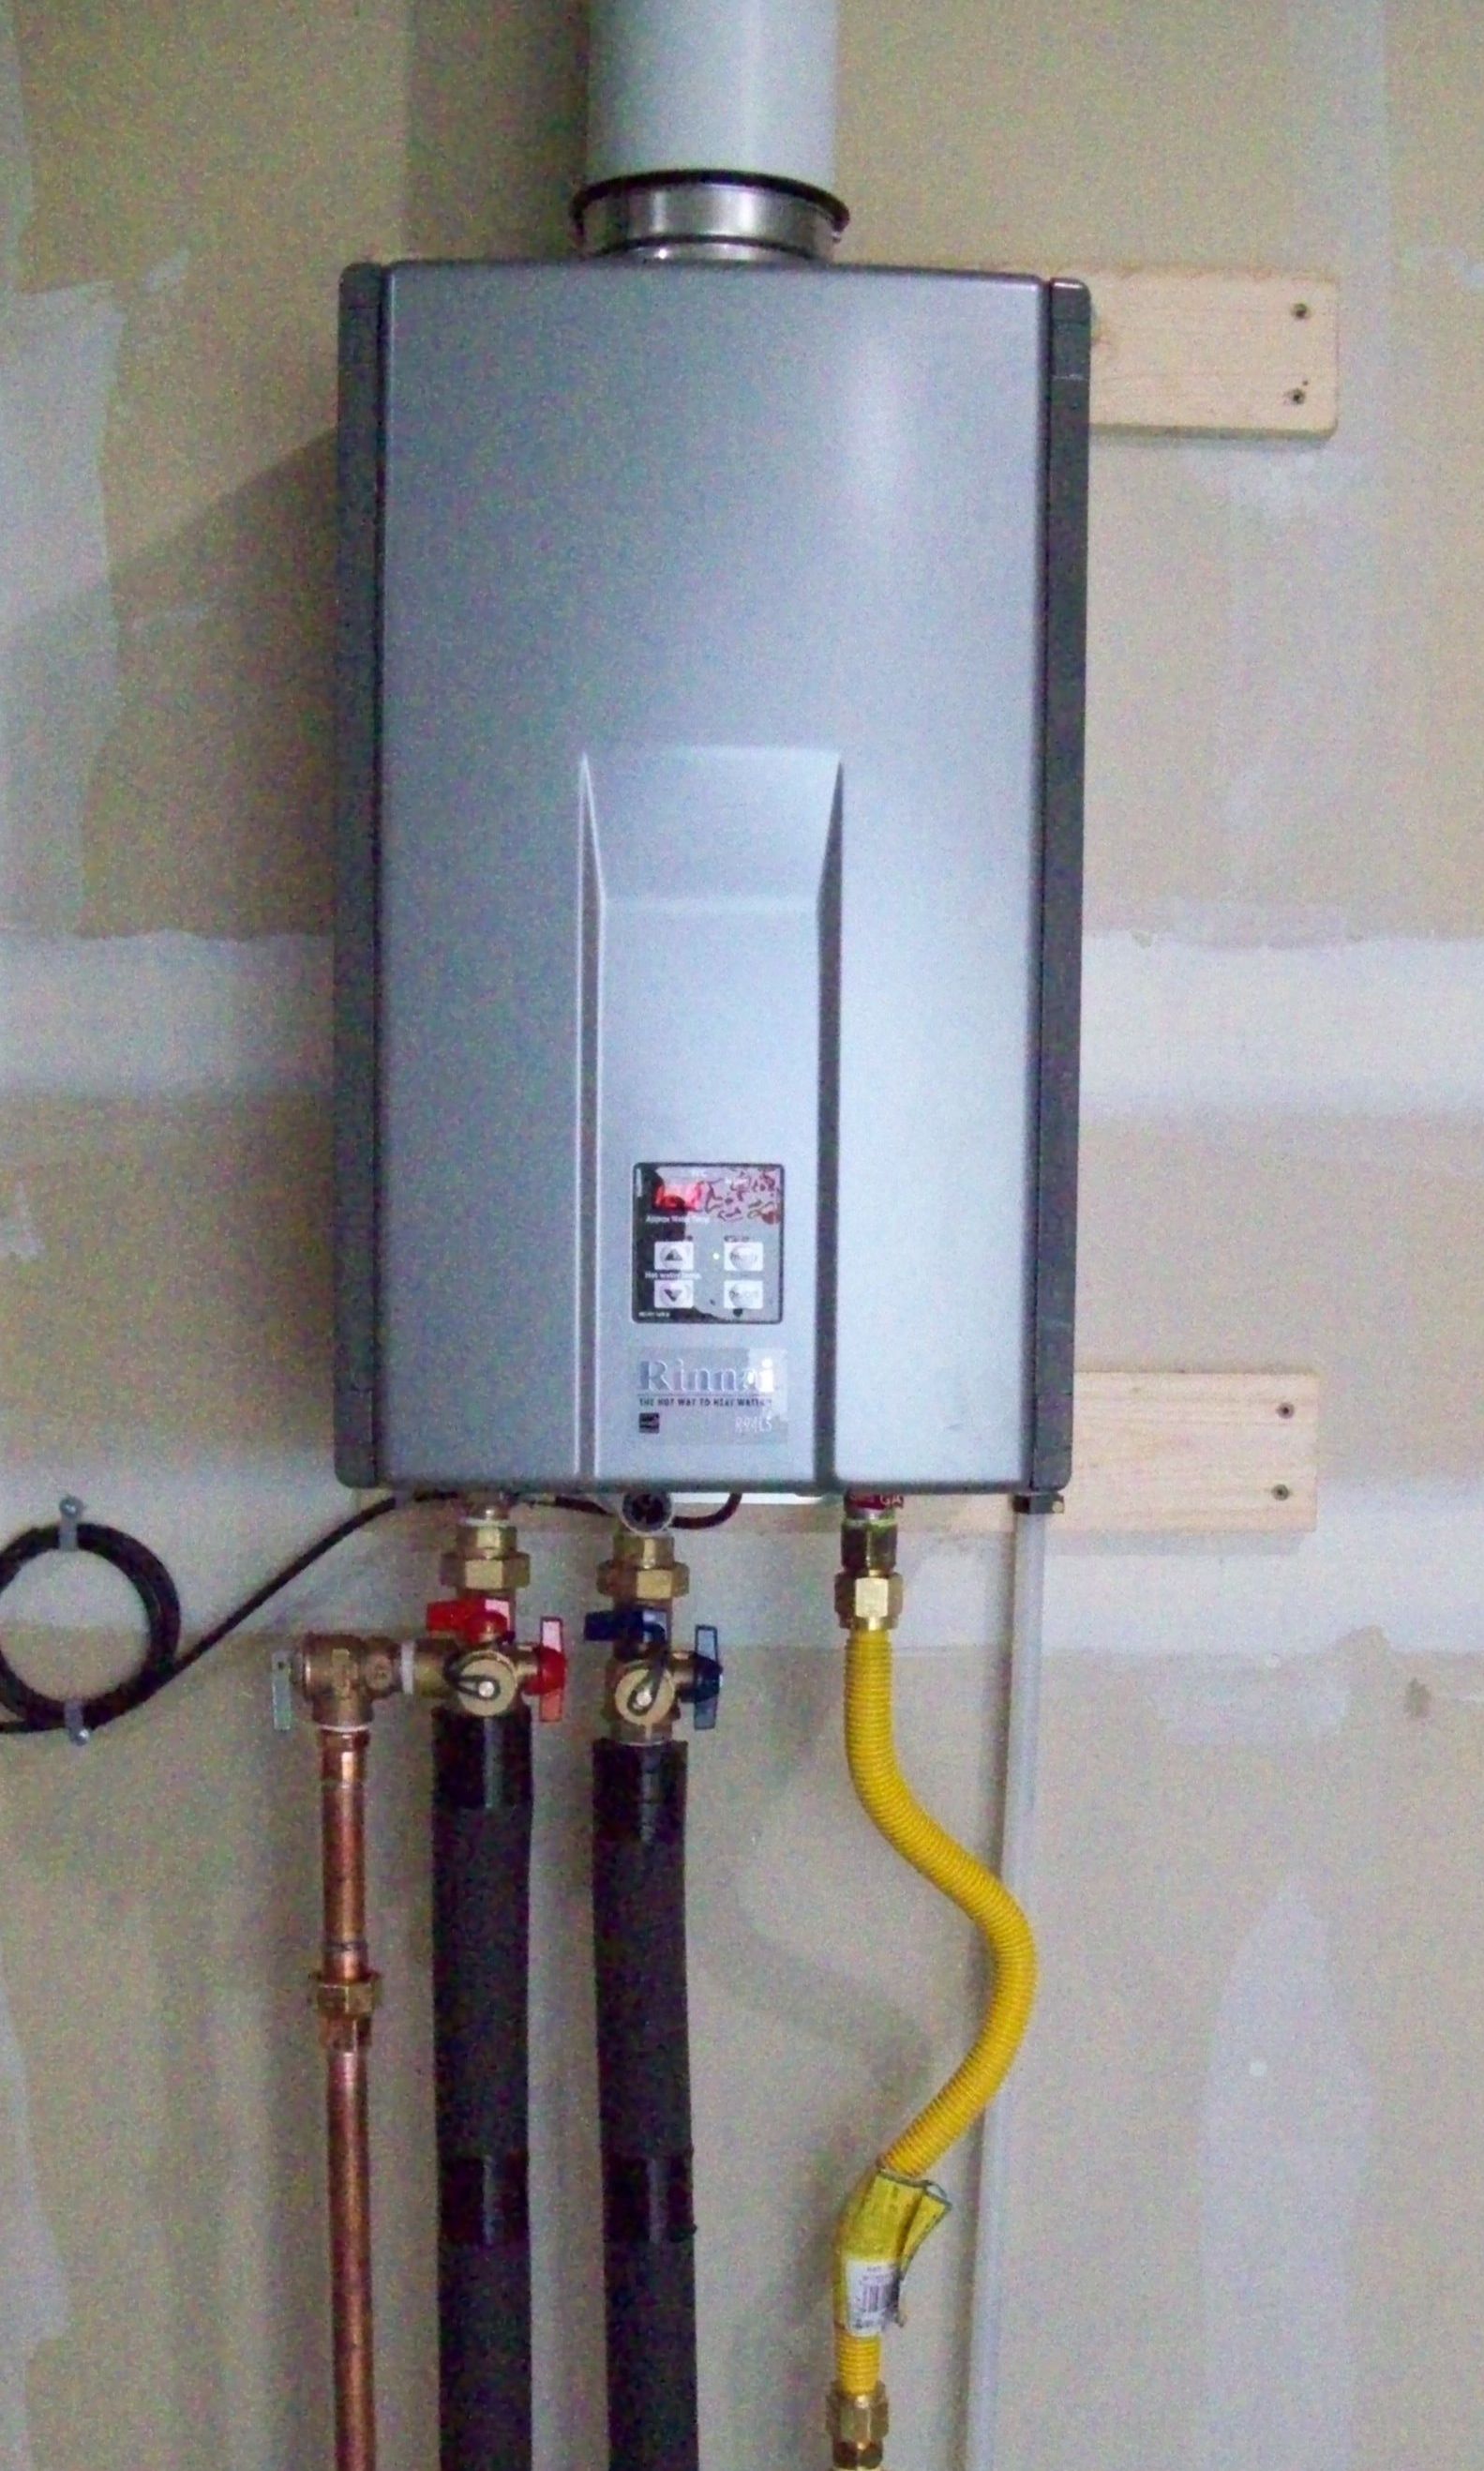 Tankless Water Heater 